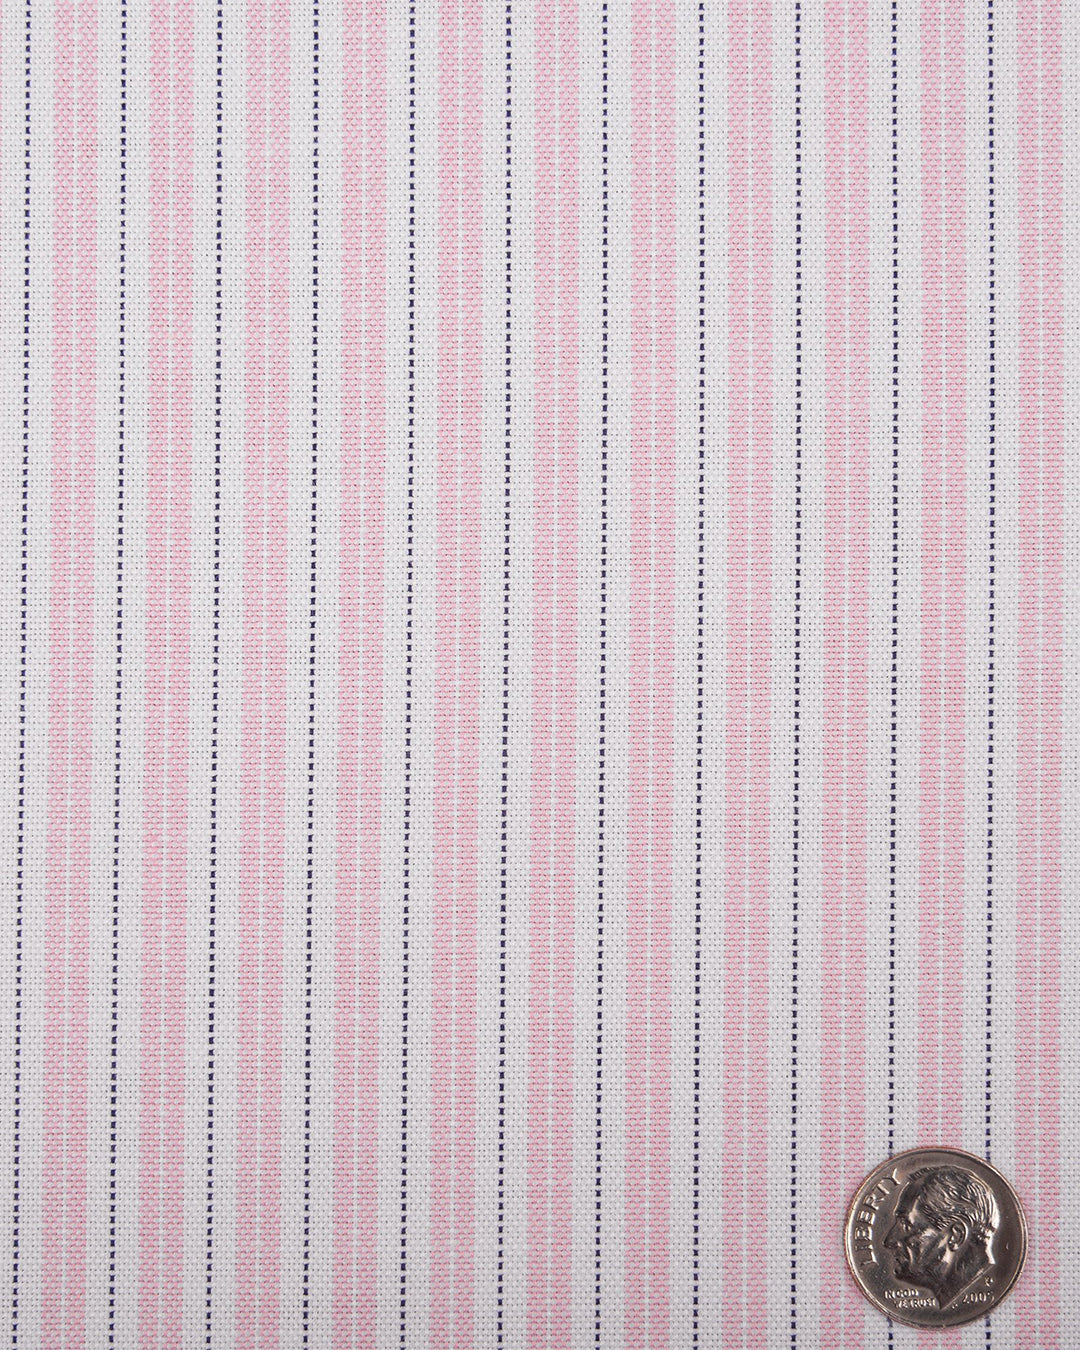 Close up of the custom oxford shirt for men by Luxire in soft pink and navy stripes